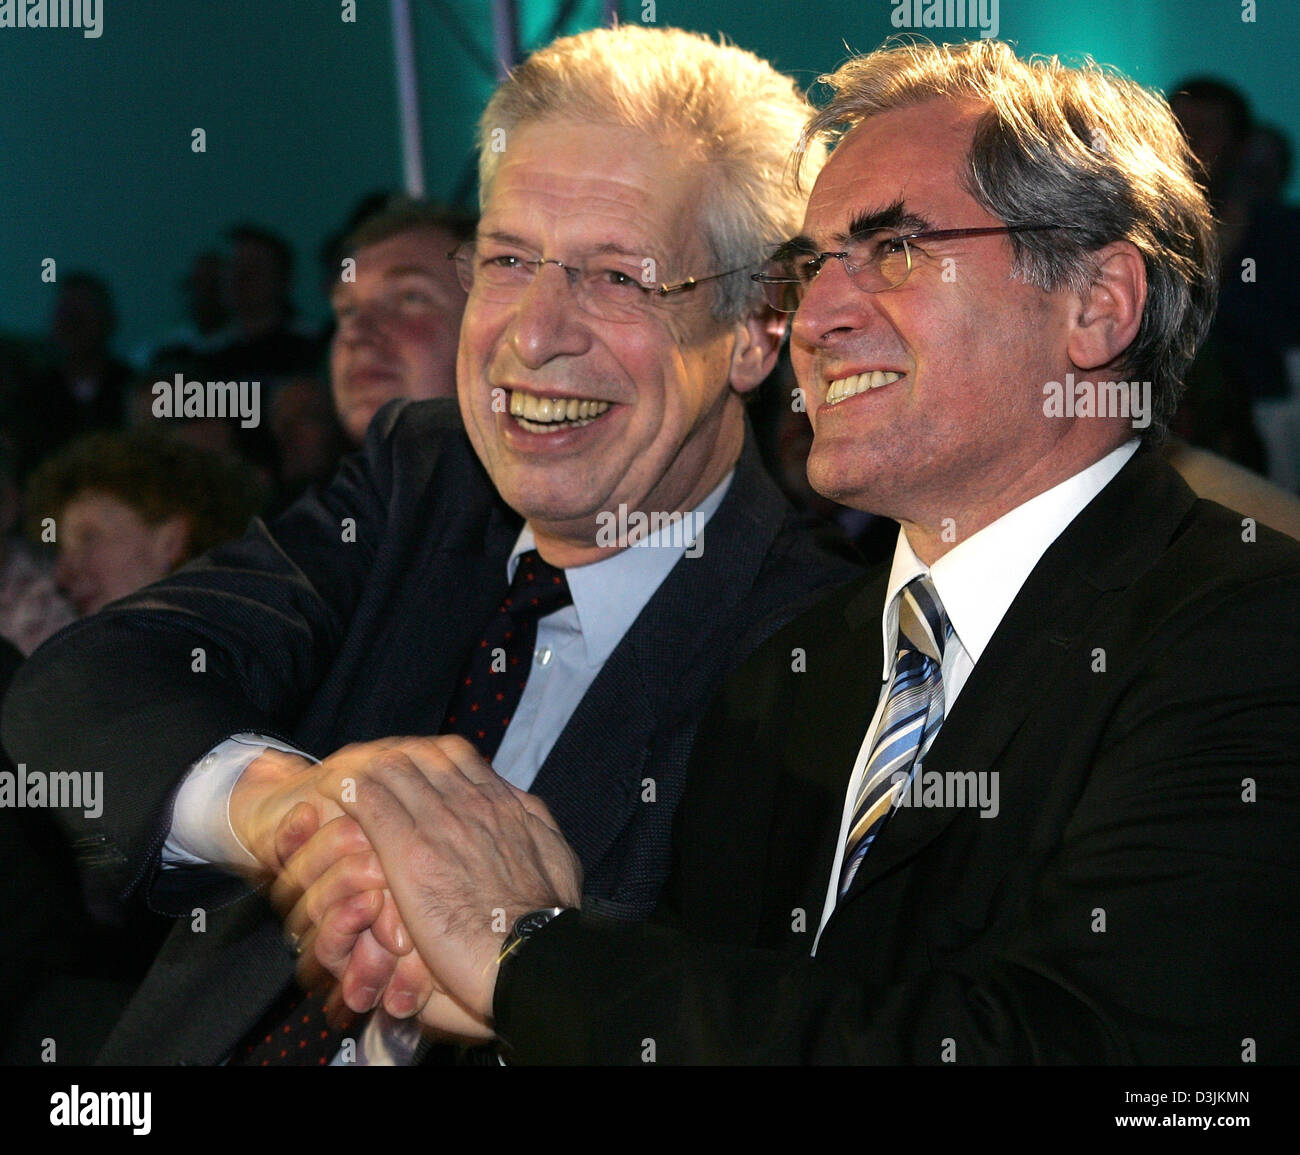 (dpa) - Bremen's governing mayor Henning Scherf (L) and Josef Kind, President of EADS Space Transportation Germany, cheer after the launch of the Ariane 5 rocket at the EADS conference center in Bremen, Germany, 12 February 2005. The rocket was launched from the space centre in Kourou, French Guyana. Stock Photo